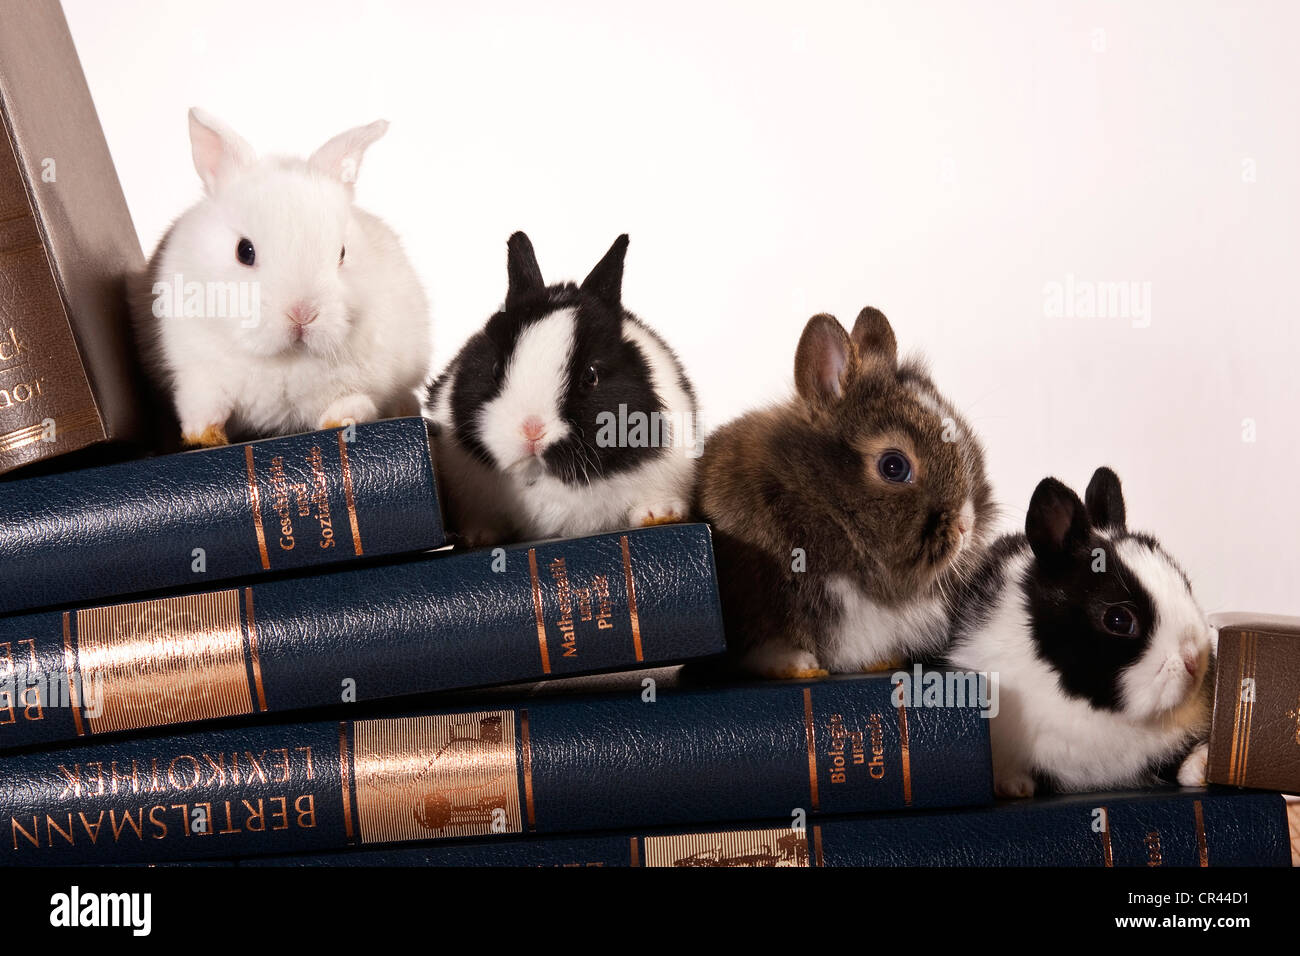 Young dwarf rabbits on leather-bound volumes Stock Photo